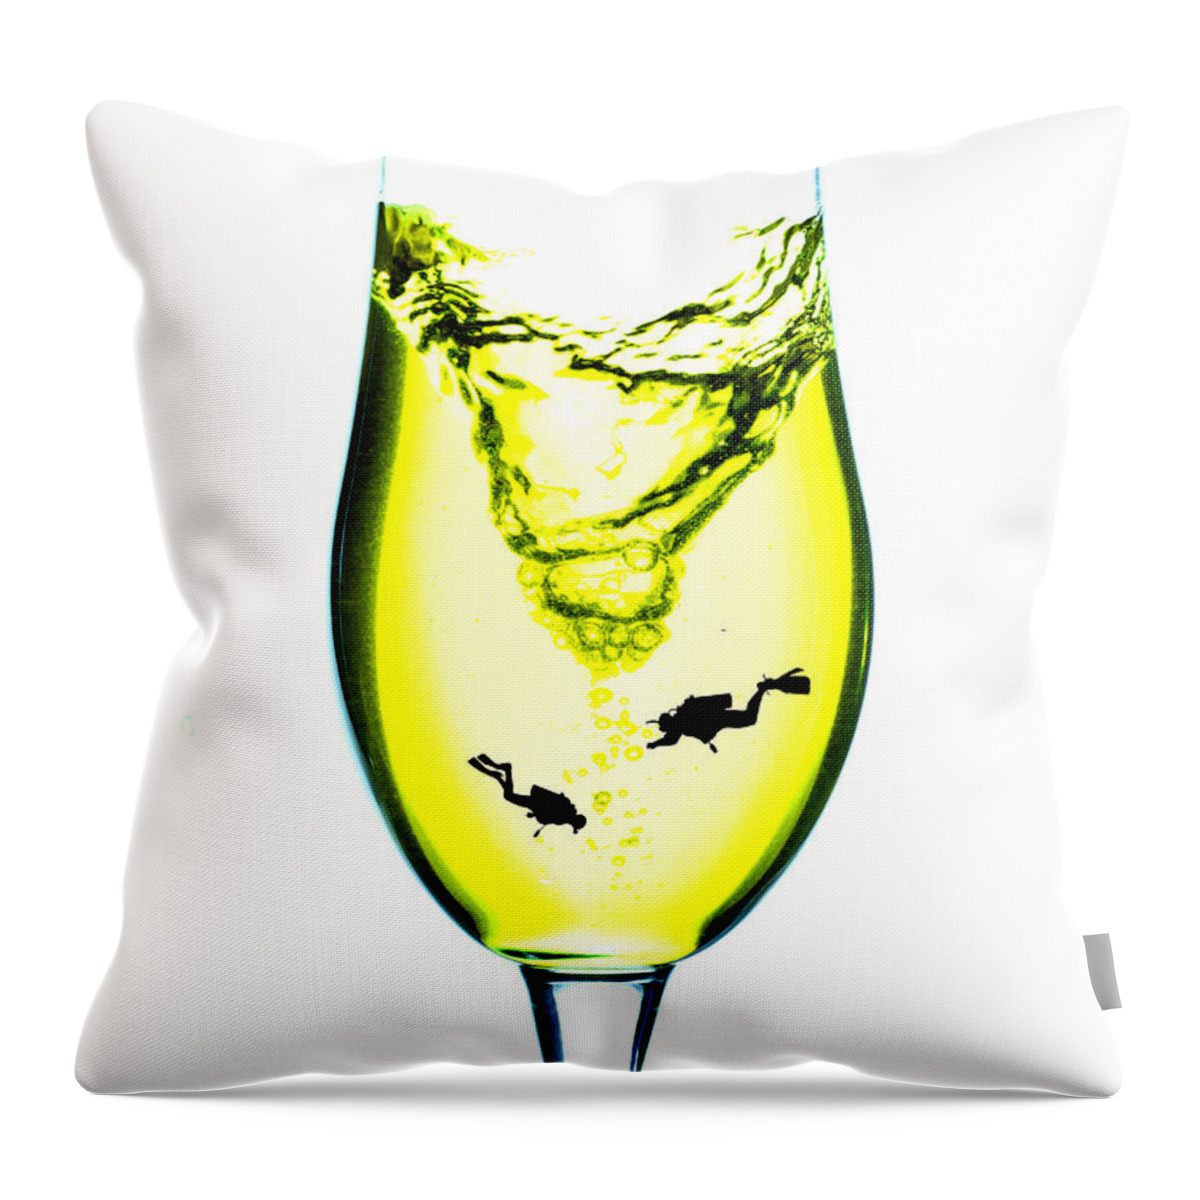 Vortex Throw Pillow featuring the photograph Vortex diving in the glass cup Little People On Food by Paul Ge